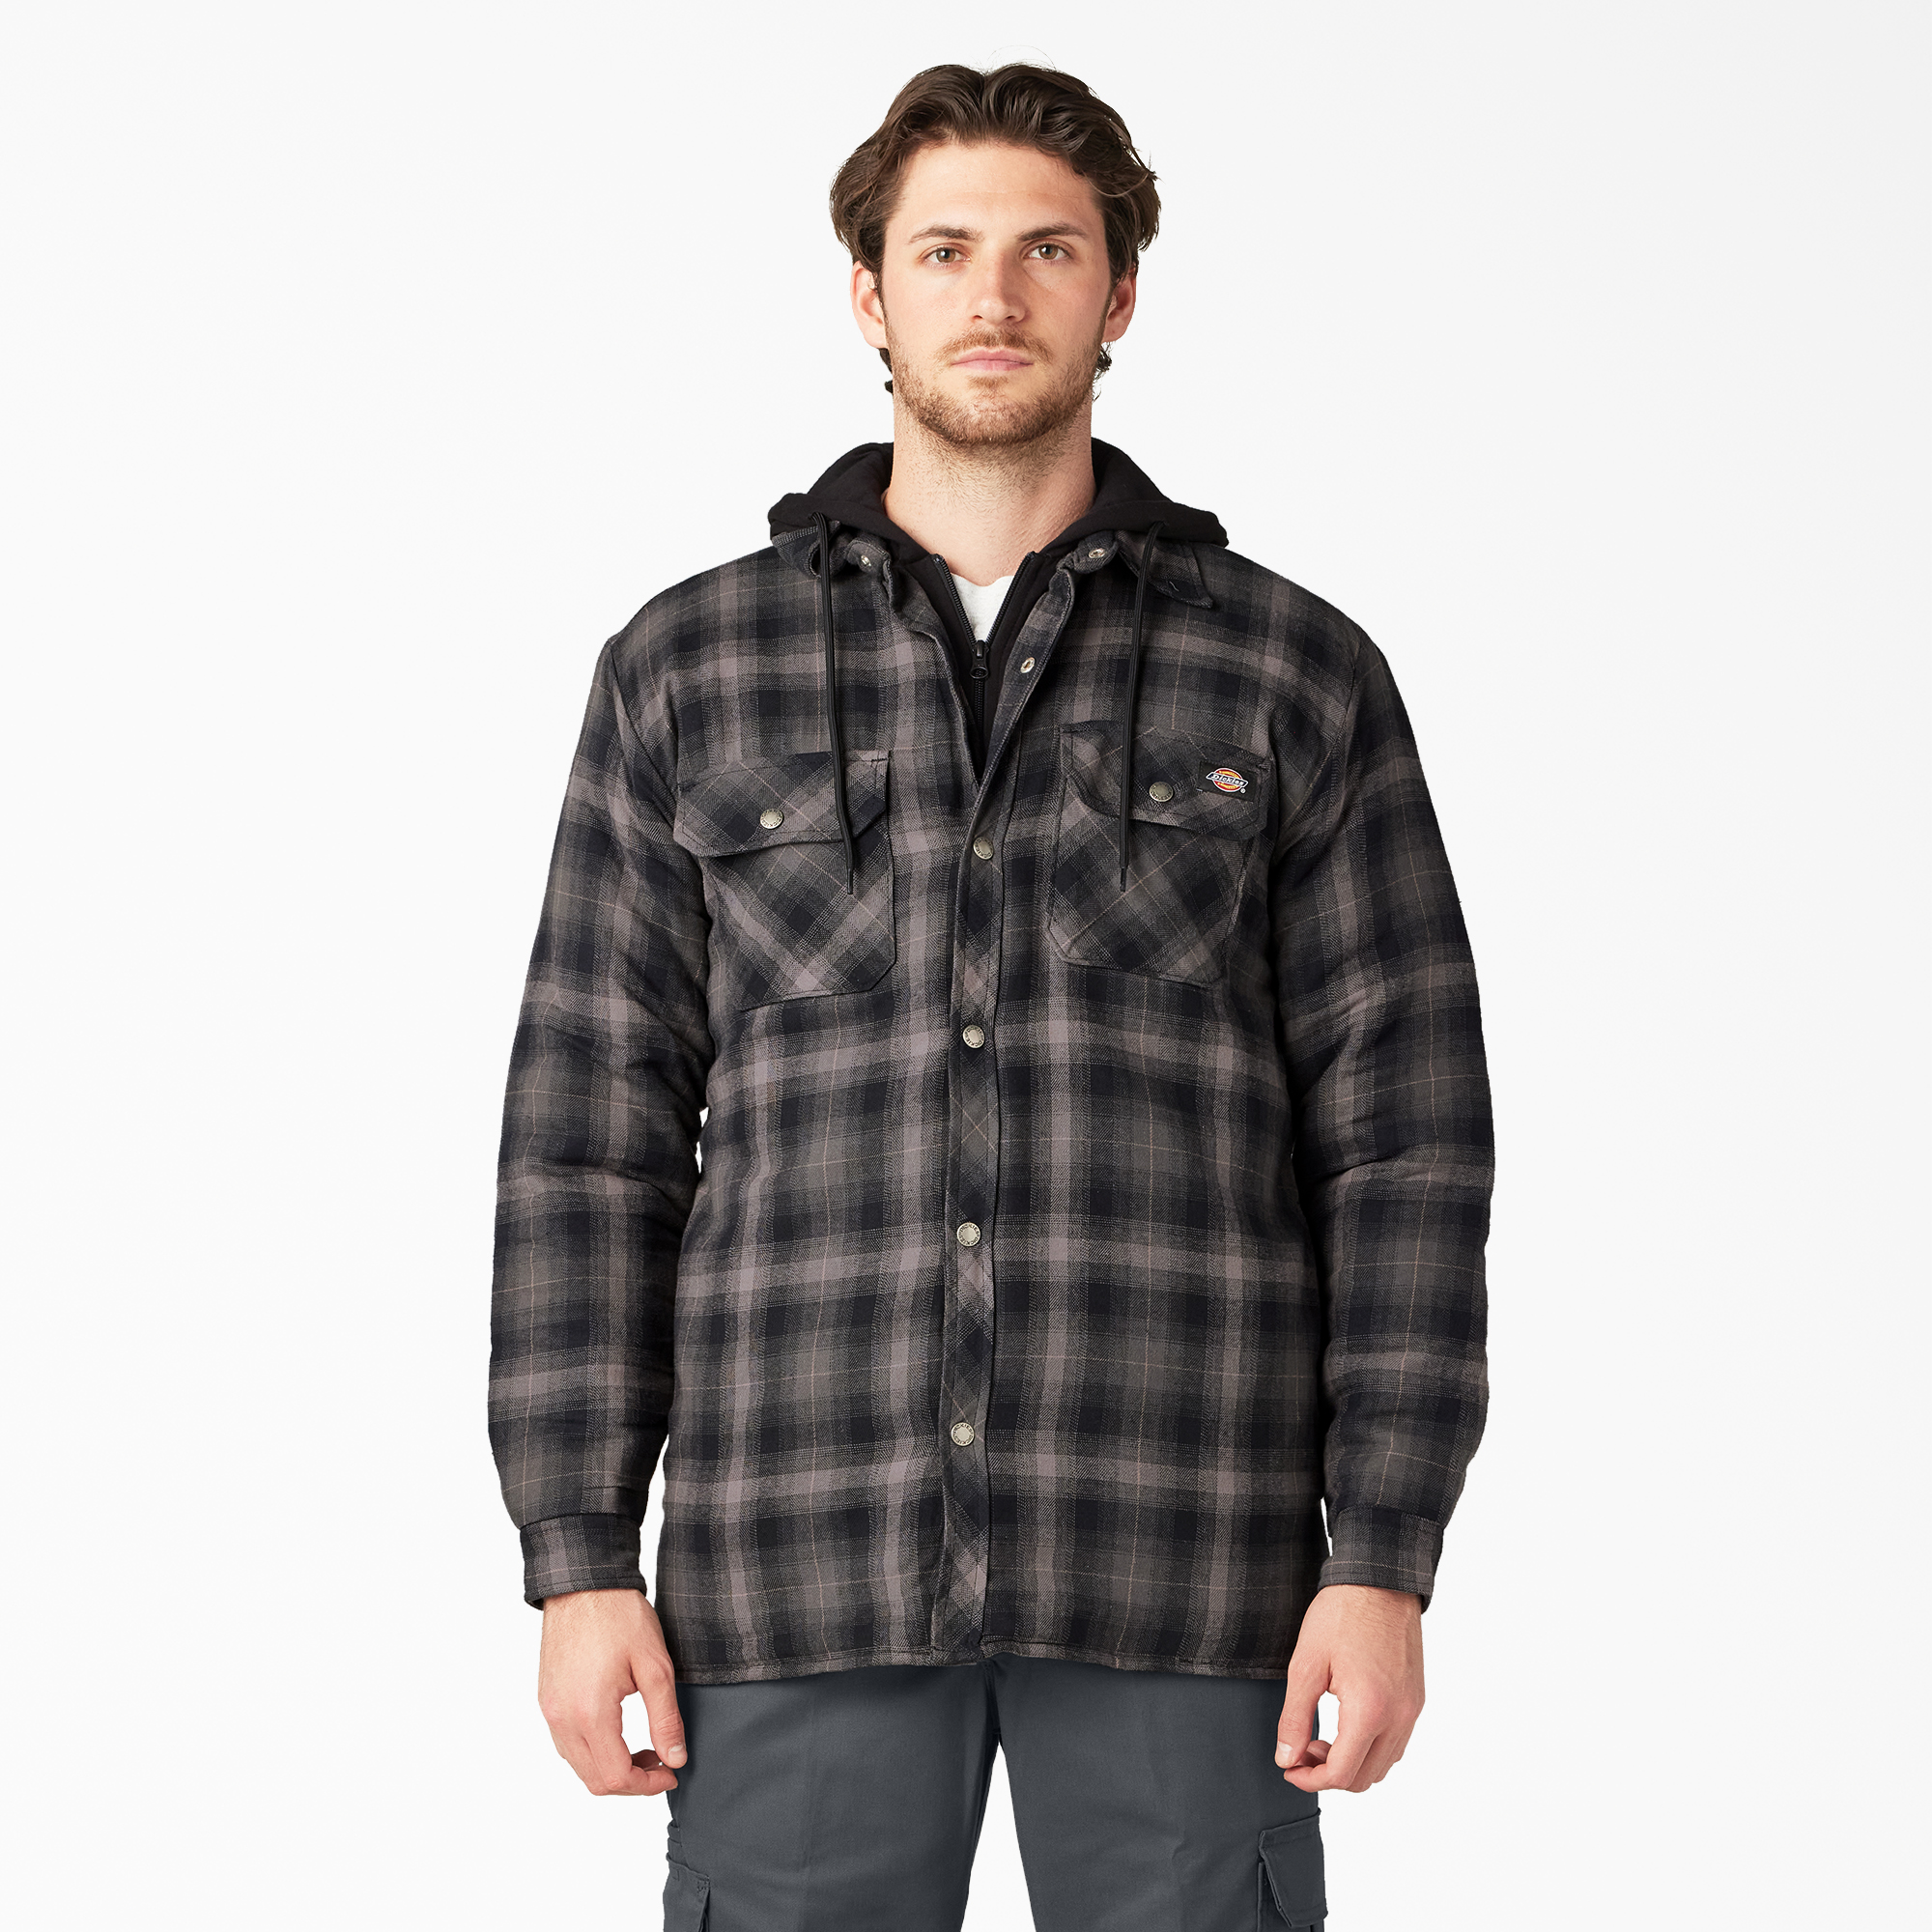 Fleece Hooded Flannel Shirt Jacket with Hydroshield - Black Ombre Plaid (AP1)